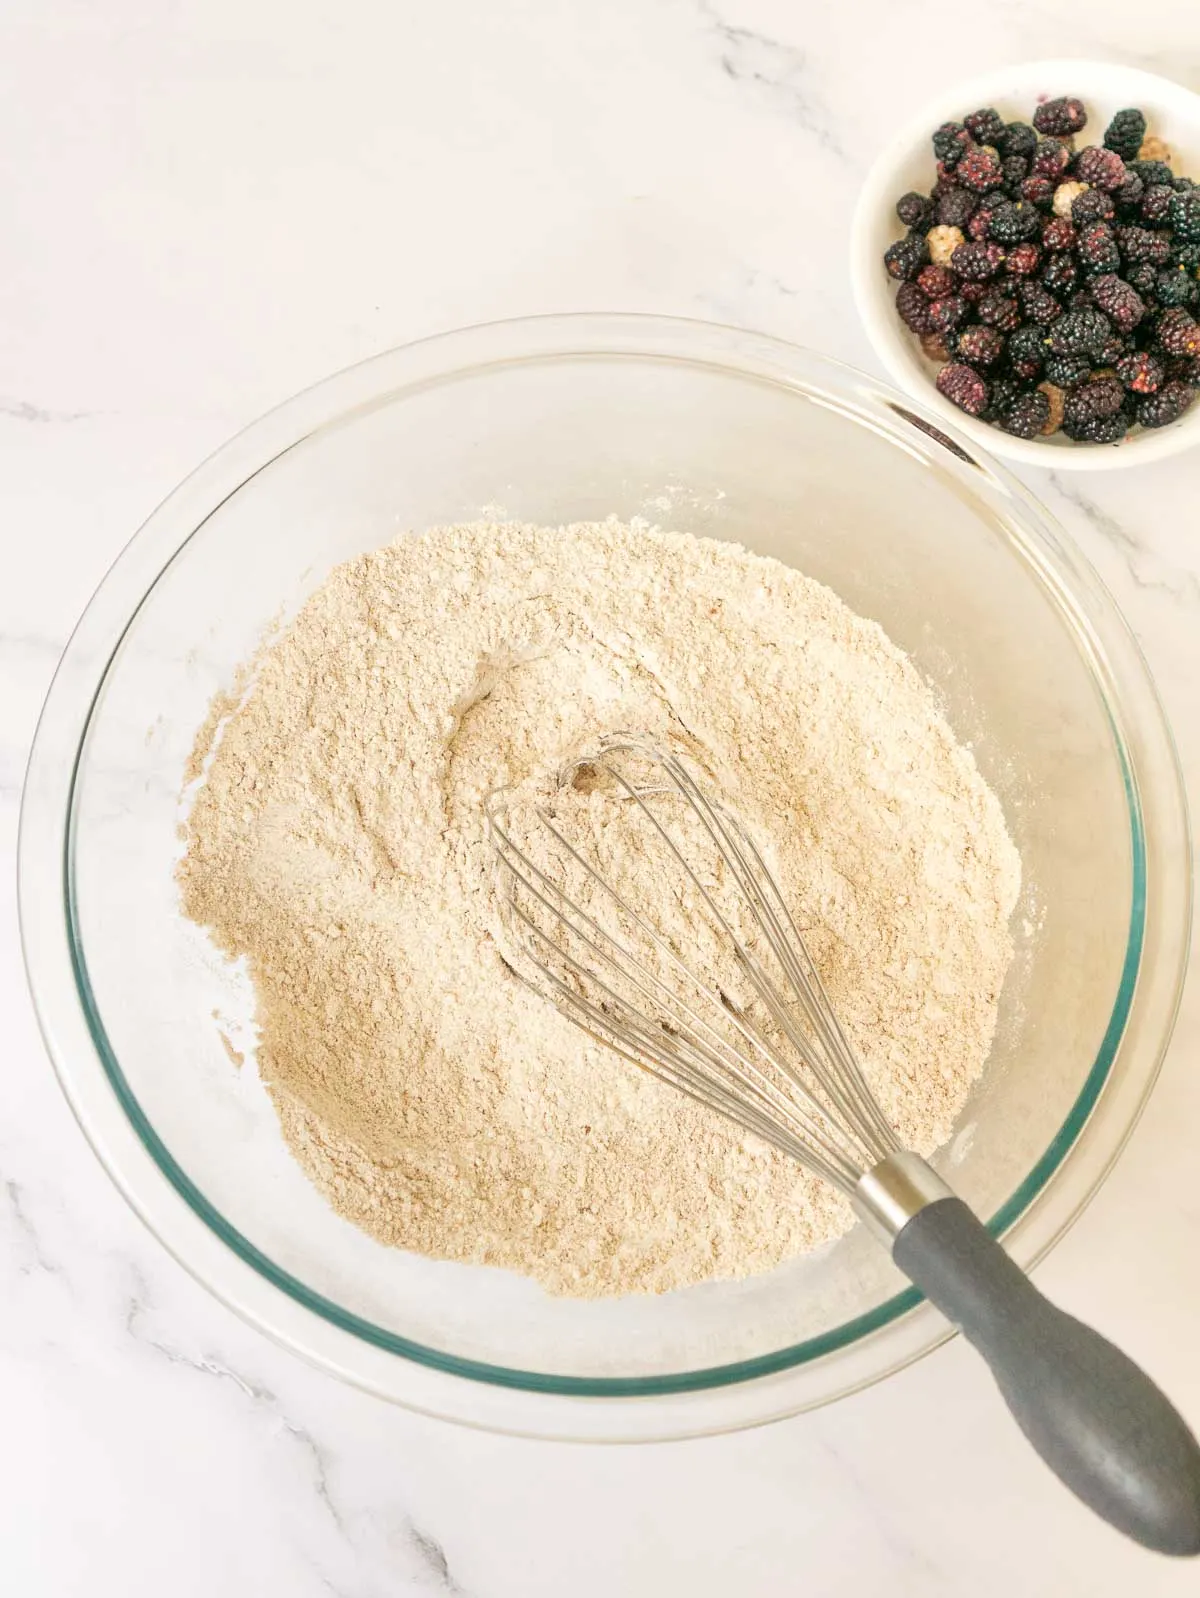 Dry ingredients for muffins in a bowl